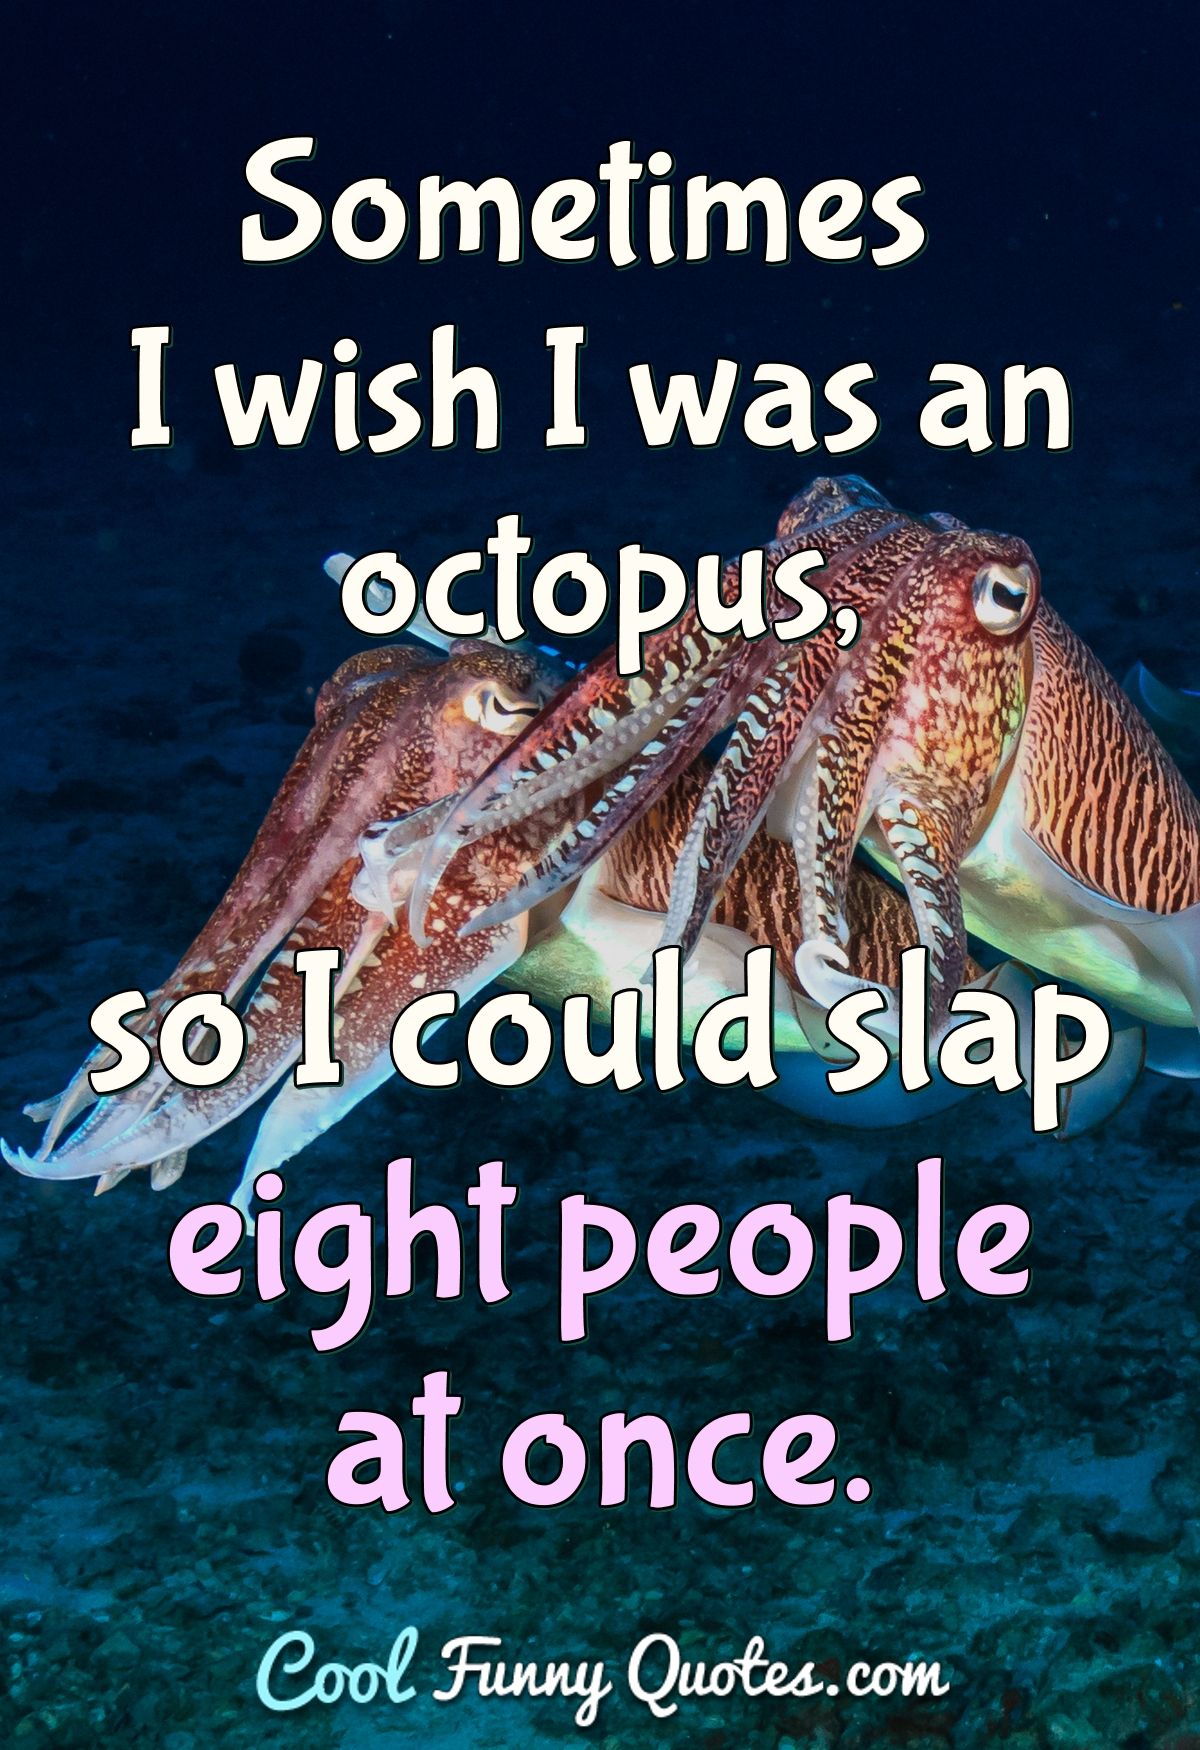 Sometimes I wish I was an octopus, so I could slap eight people at once.